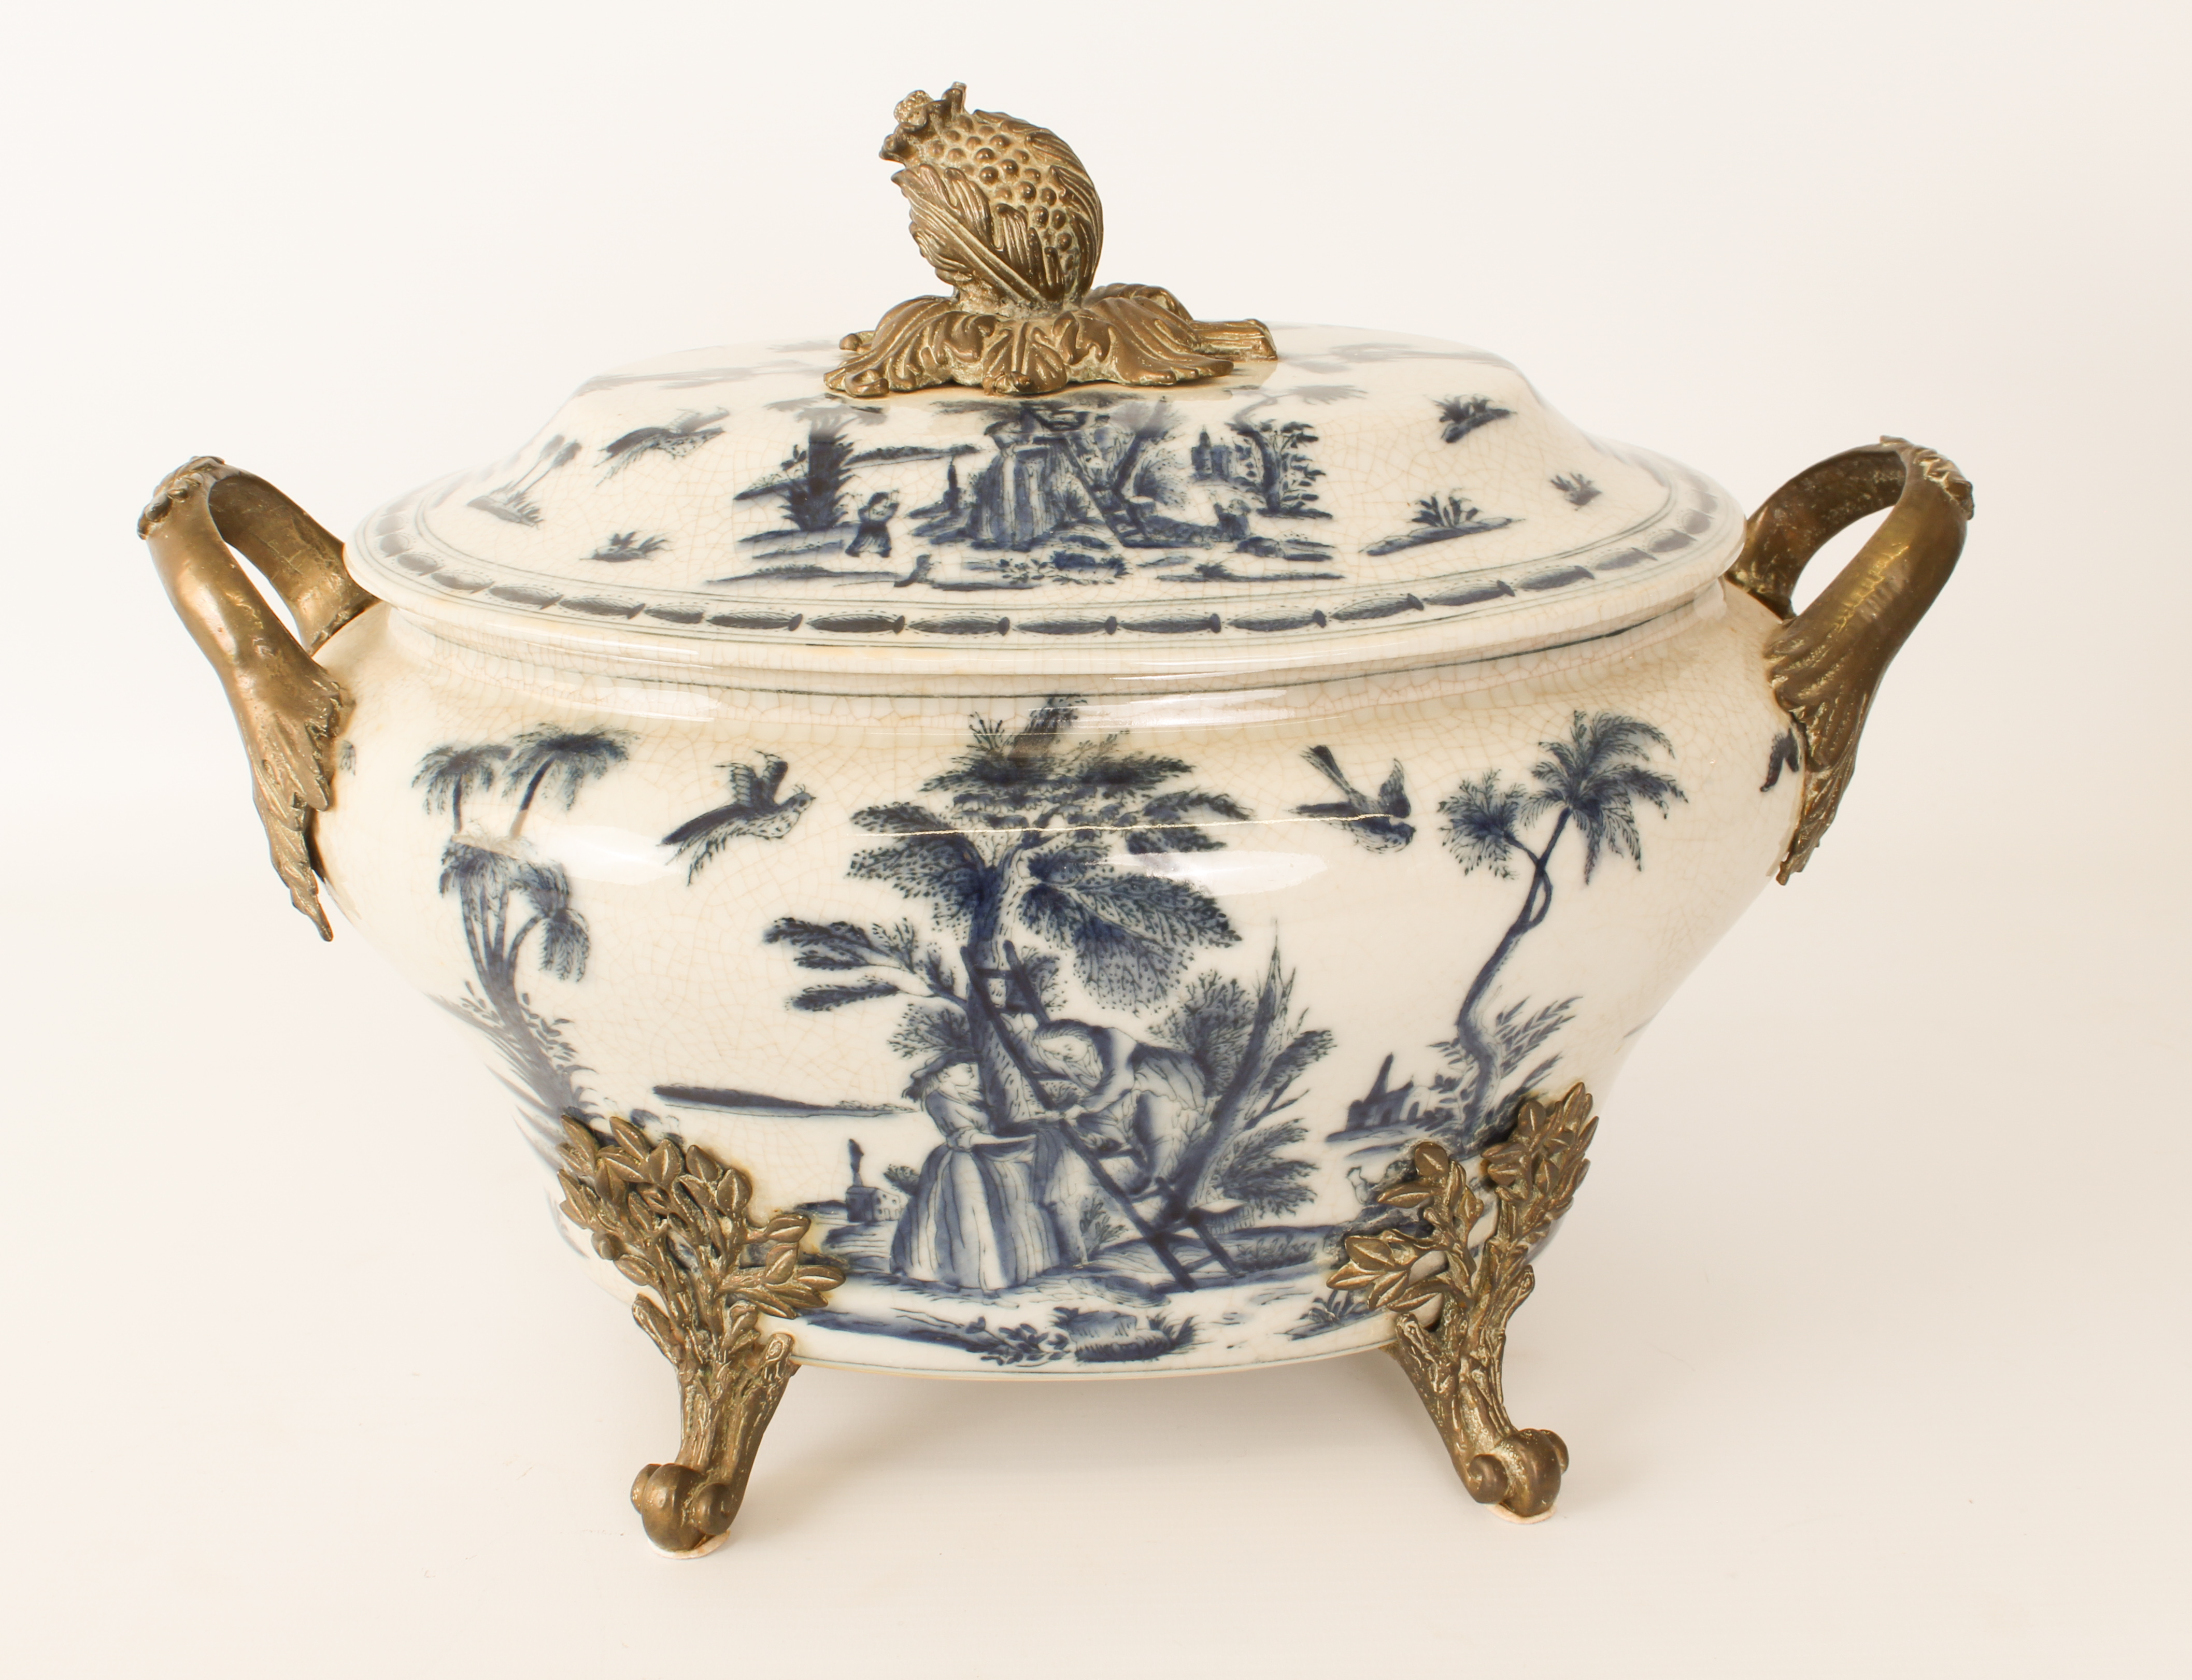 A blue and white porcelain covered tureen in 19th century style - modern, of bombe, oval form, - Image 4 of 5